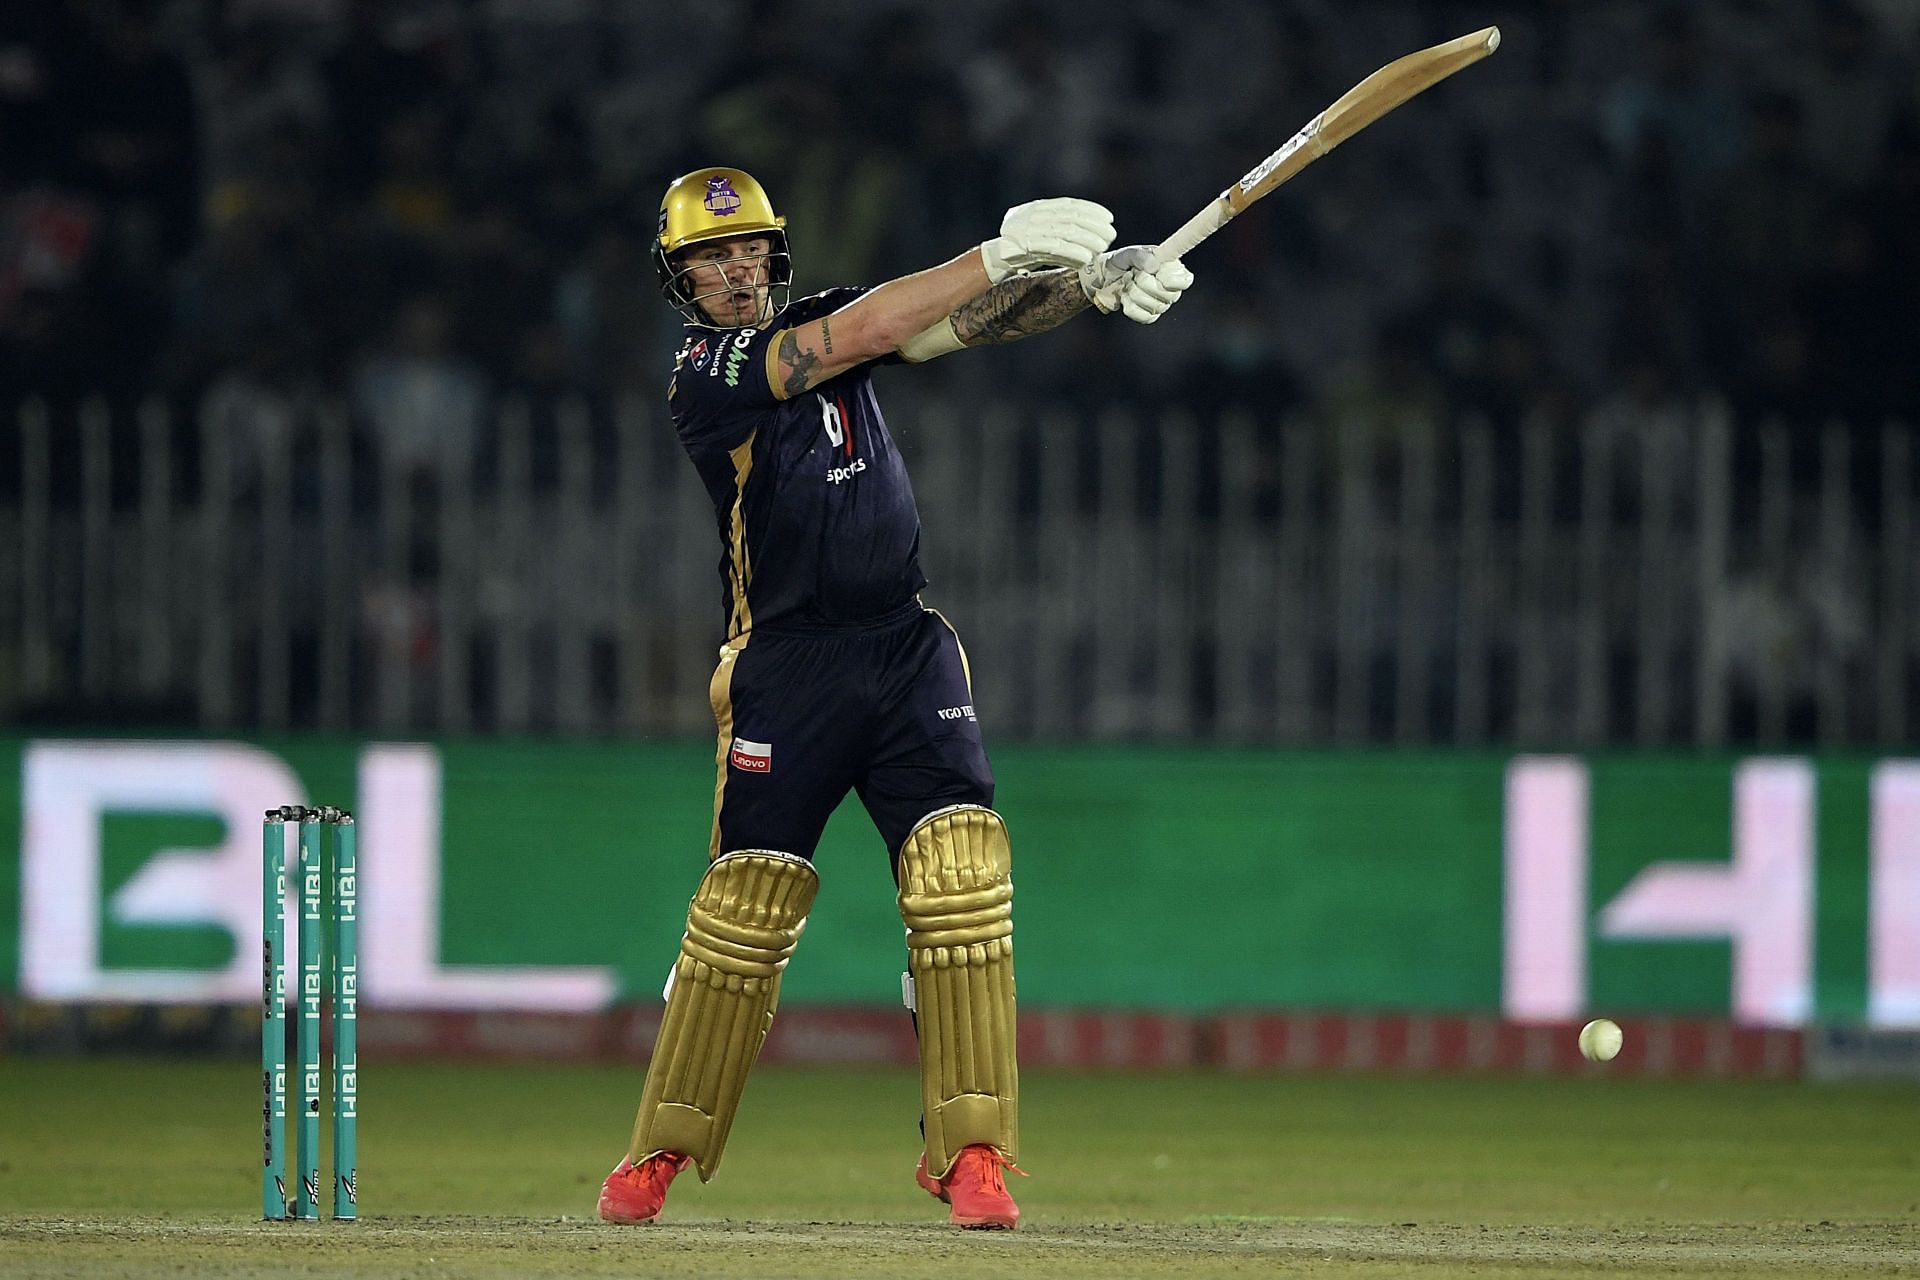 Jason Roy was outstanding with the bat in PSL 8. (Image Credits: Twitter)